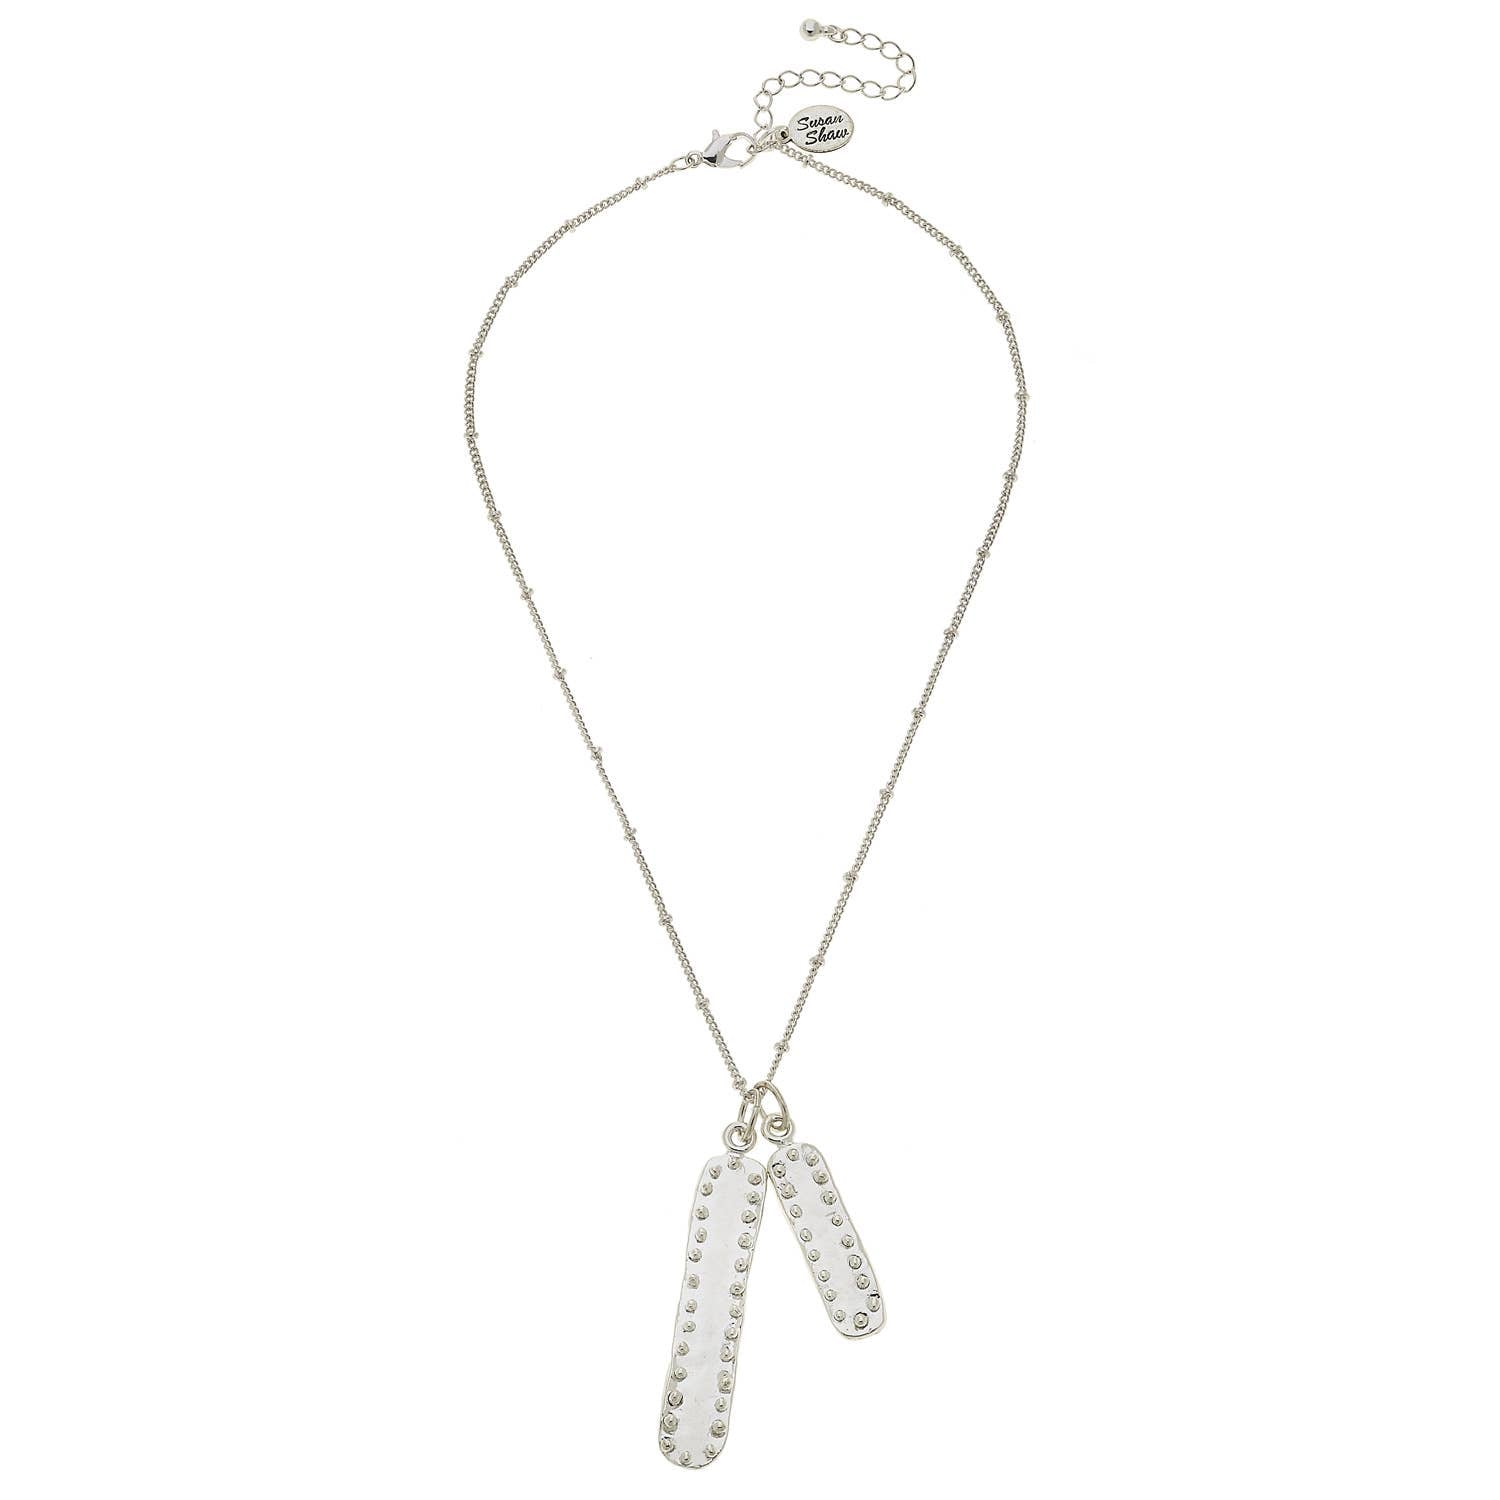 Silver Double Bar with Dots Chain Necklace